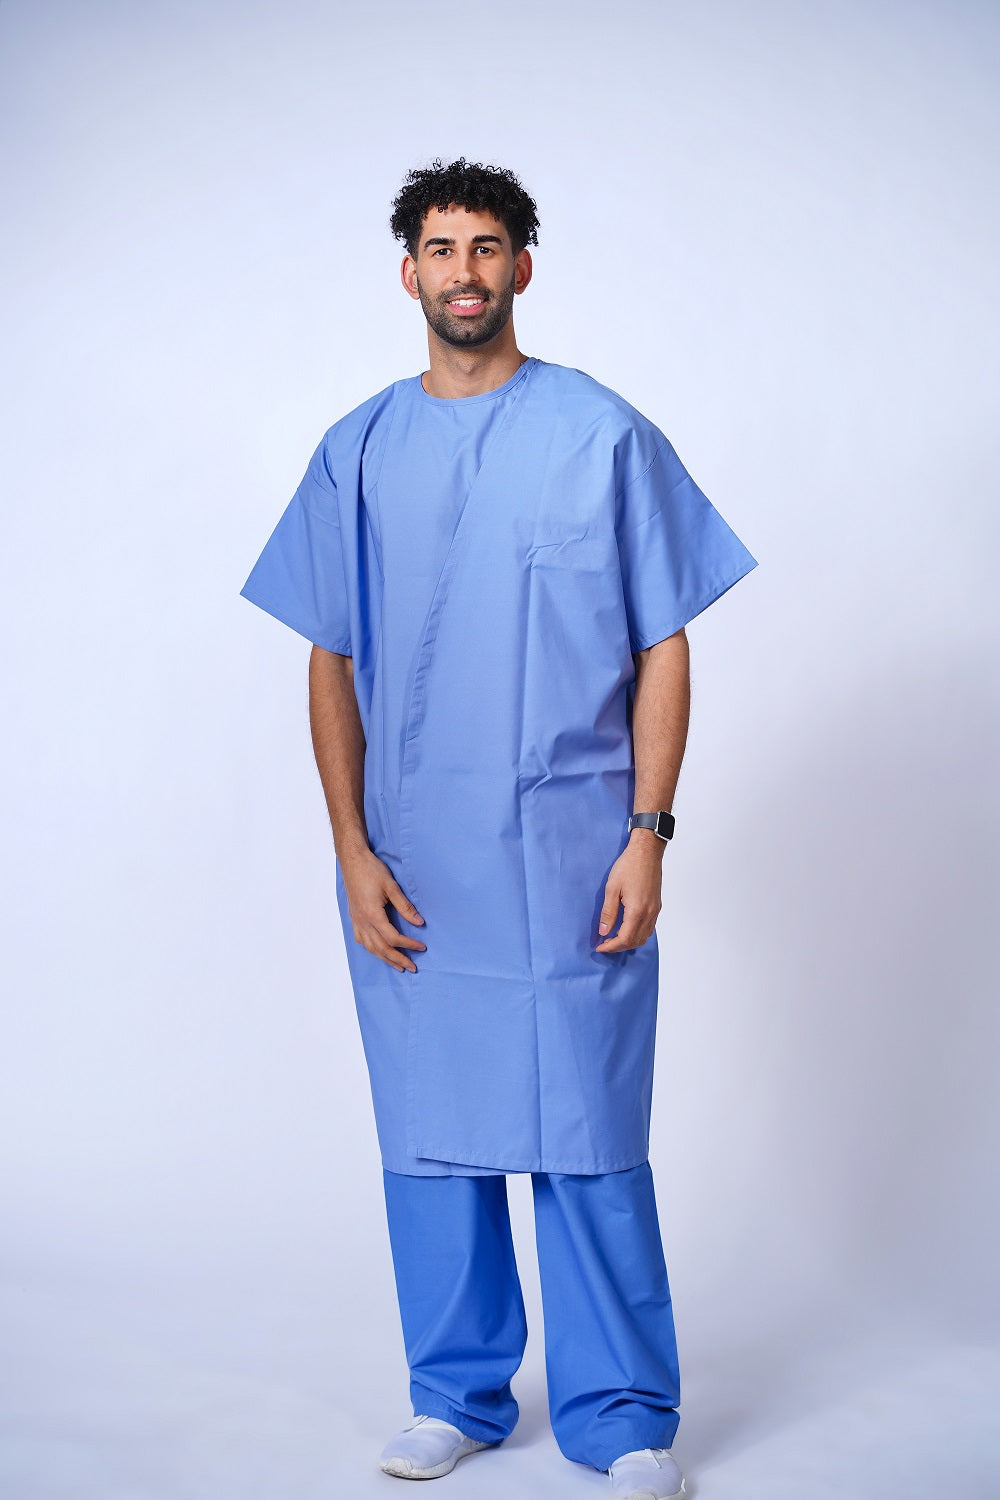 3 Arm-Hole / Examination Gowns